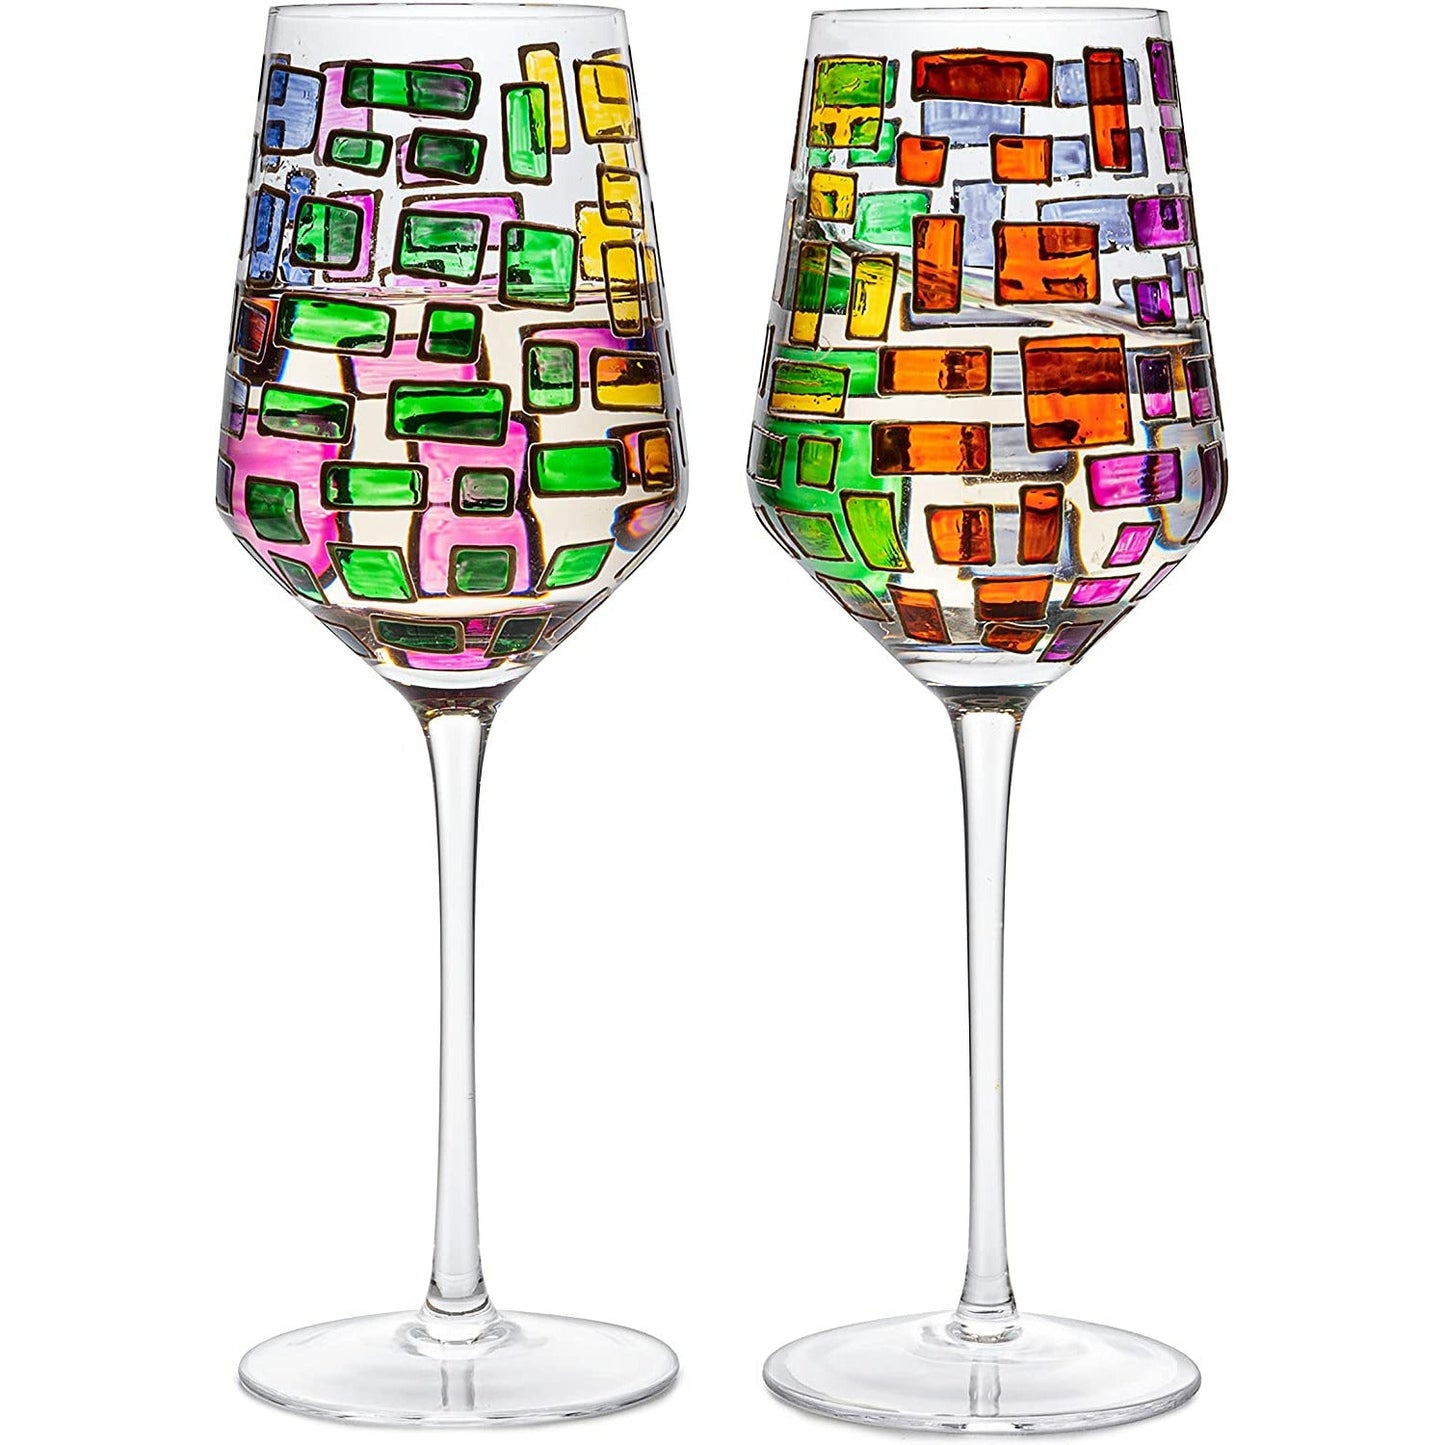 Renaissance Stained Glass Rainbow Stemmed Wine Glasses - Set of 2